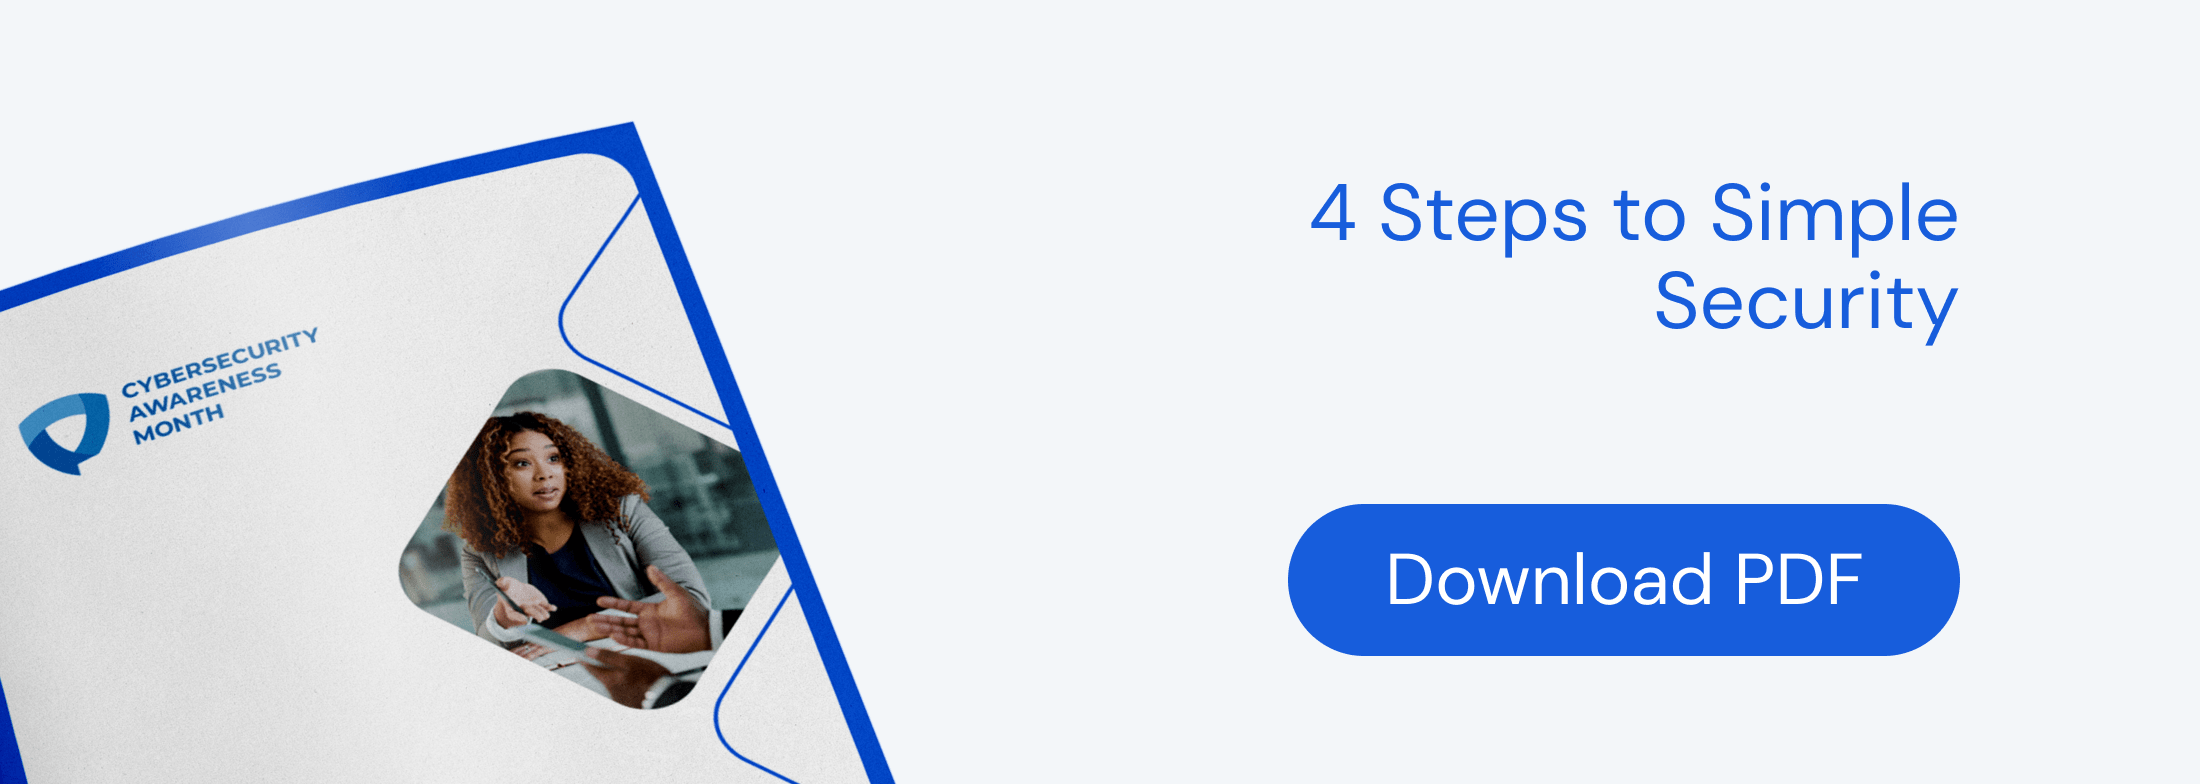 4 Steps to Simple Security